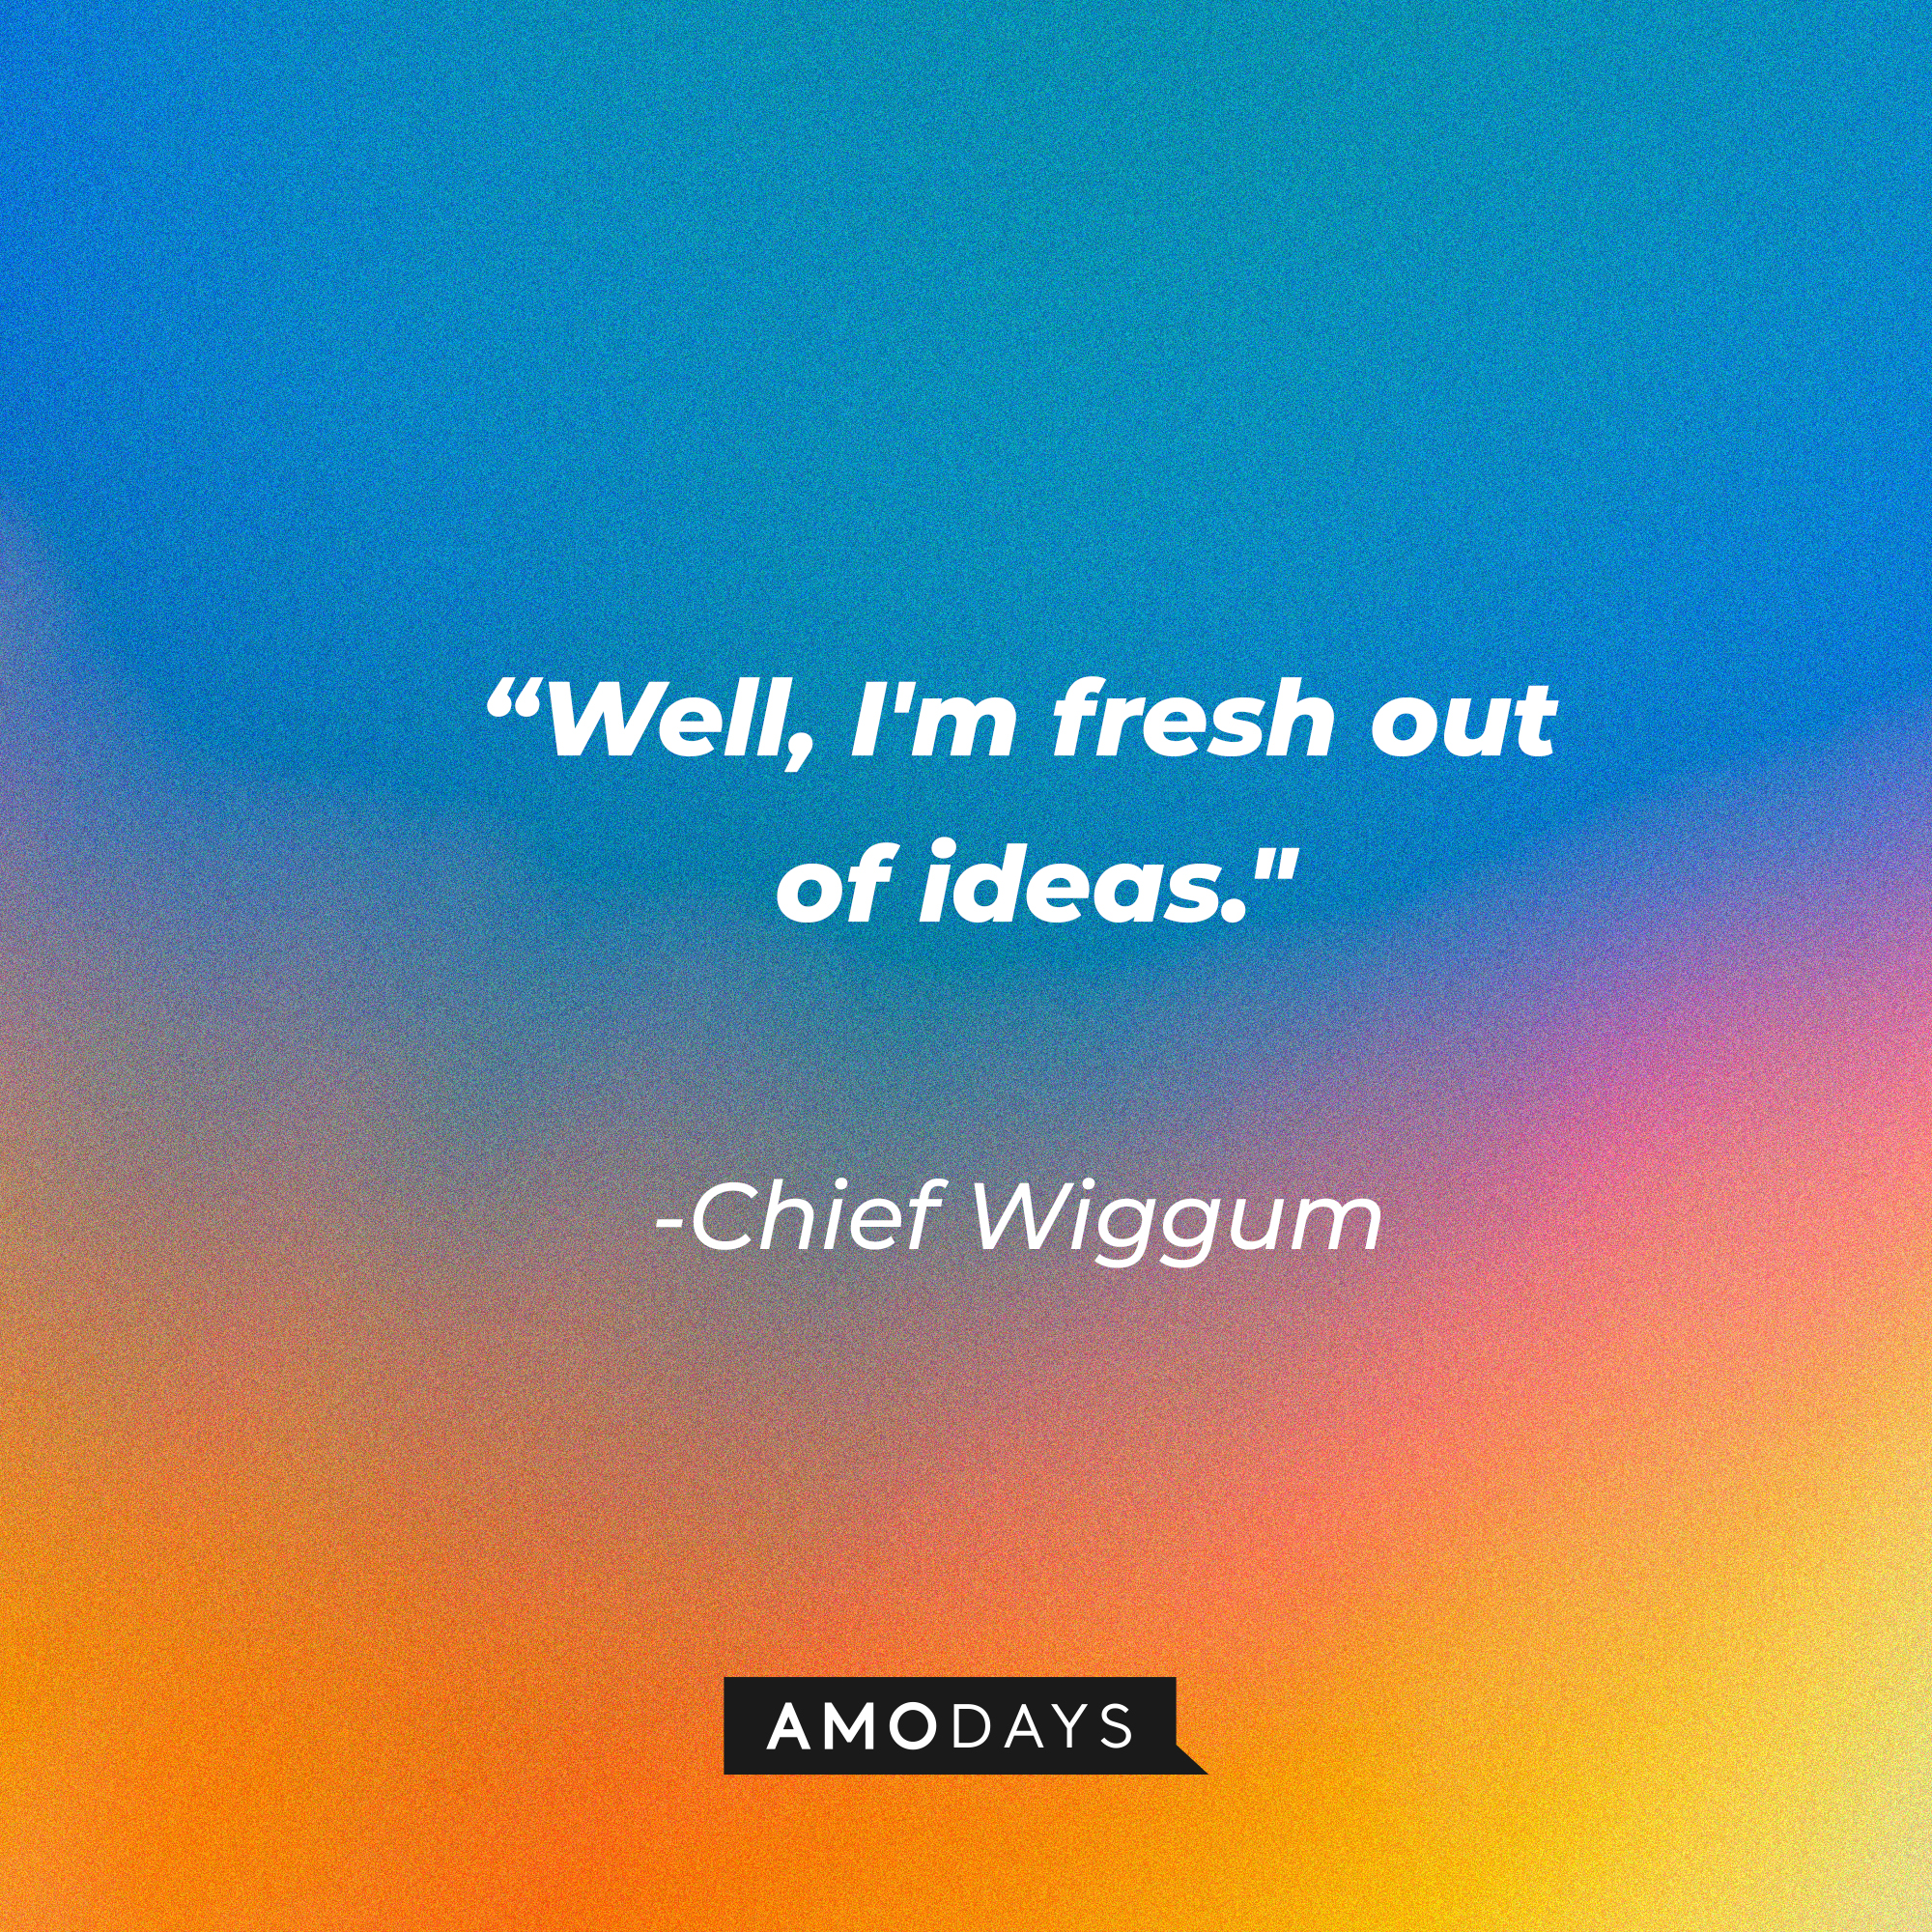 Chief Wiggum’s quote: “Well, I'm fresh out of ideas." | Source: Amodays